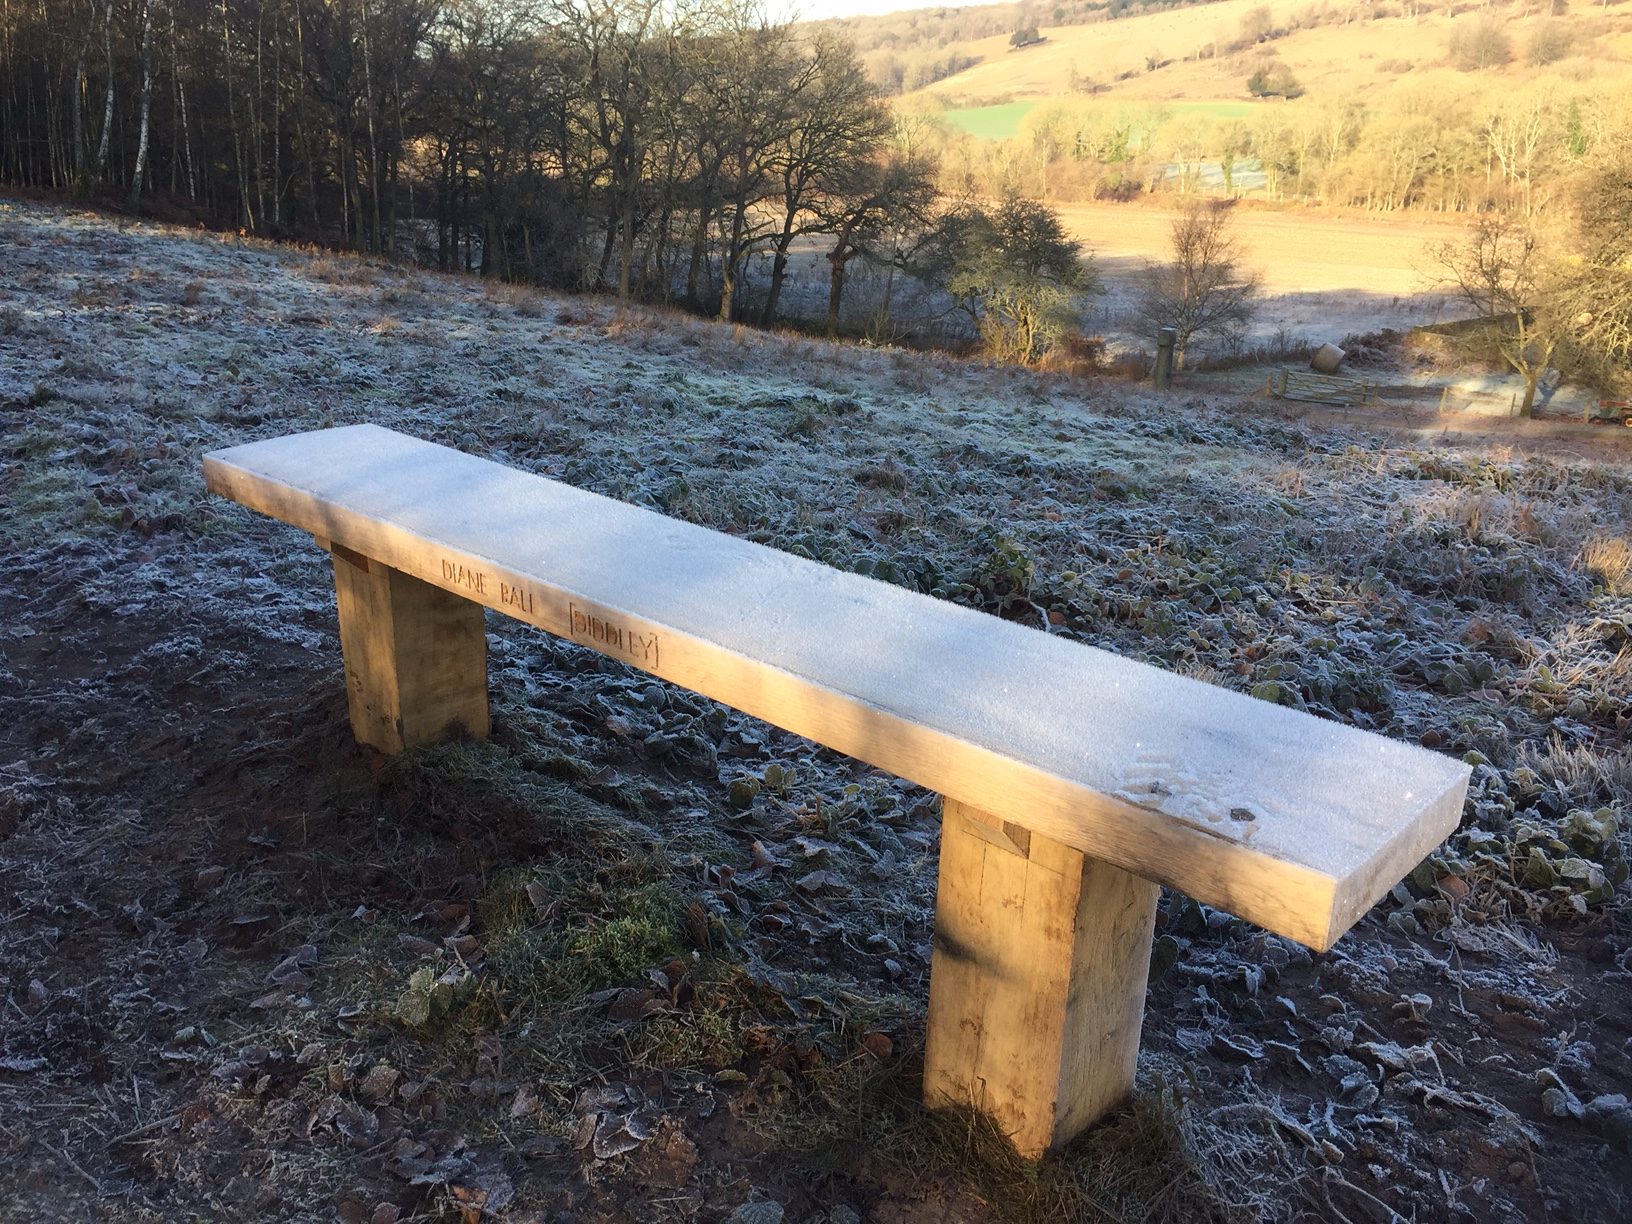 The Bench: A frosty morning in February.